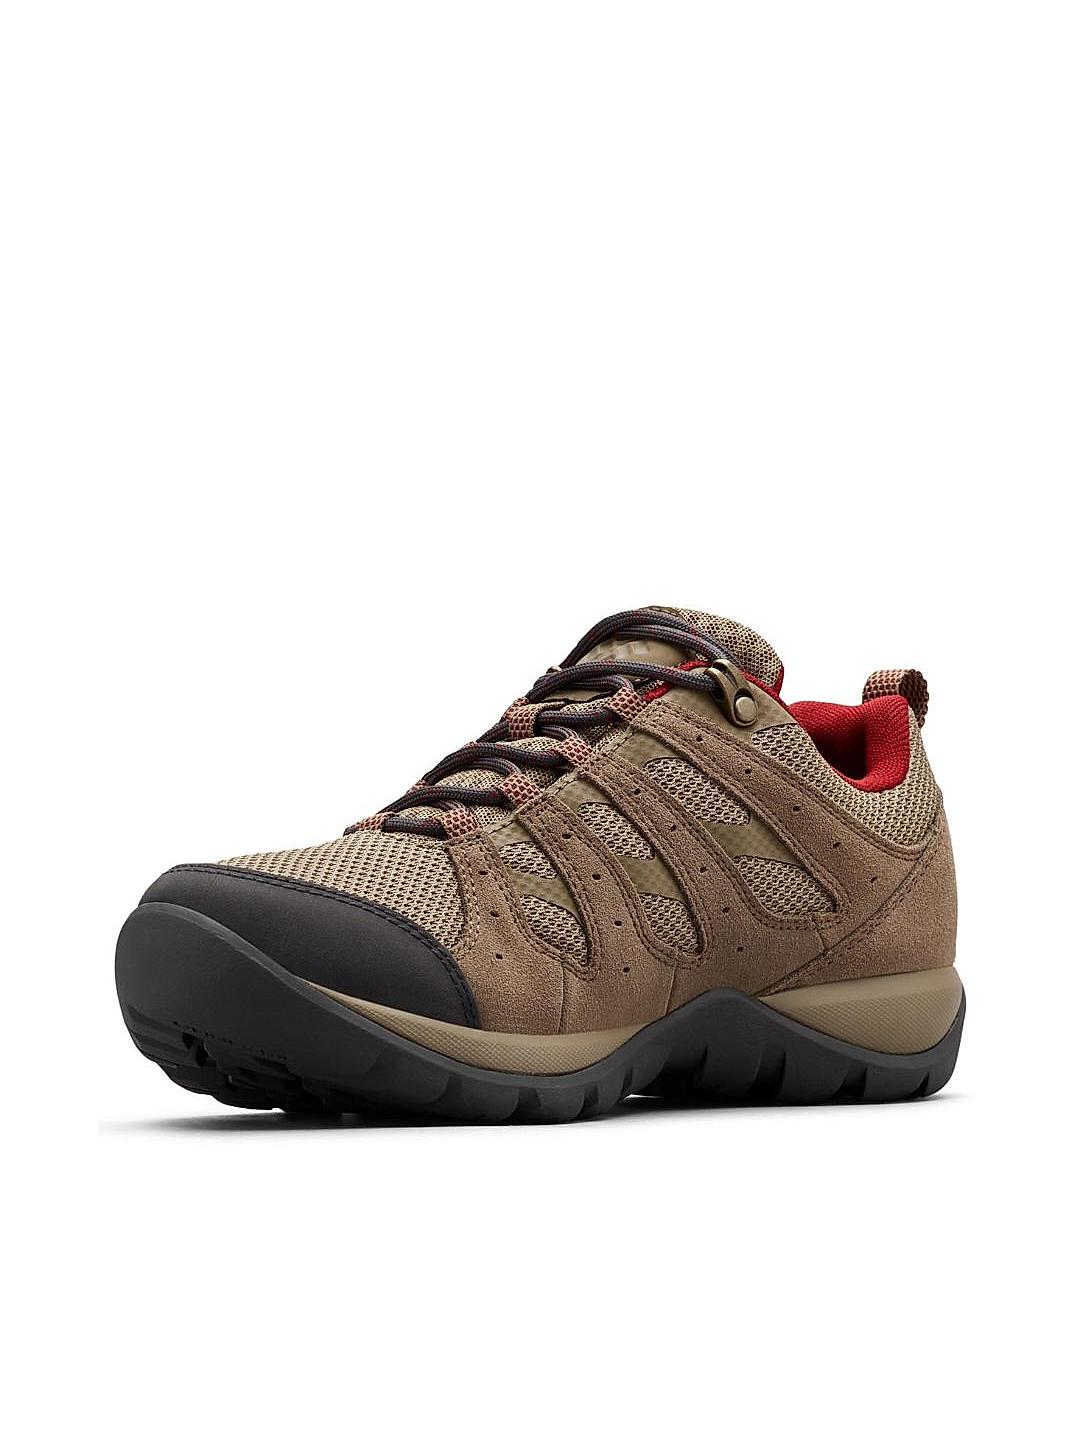 Buy Brown Redmond V2 Wp for Women Online at Columbia Sportswear | 482413